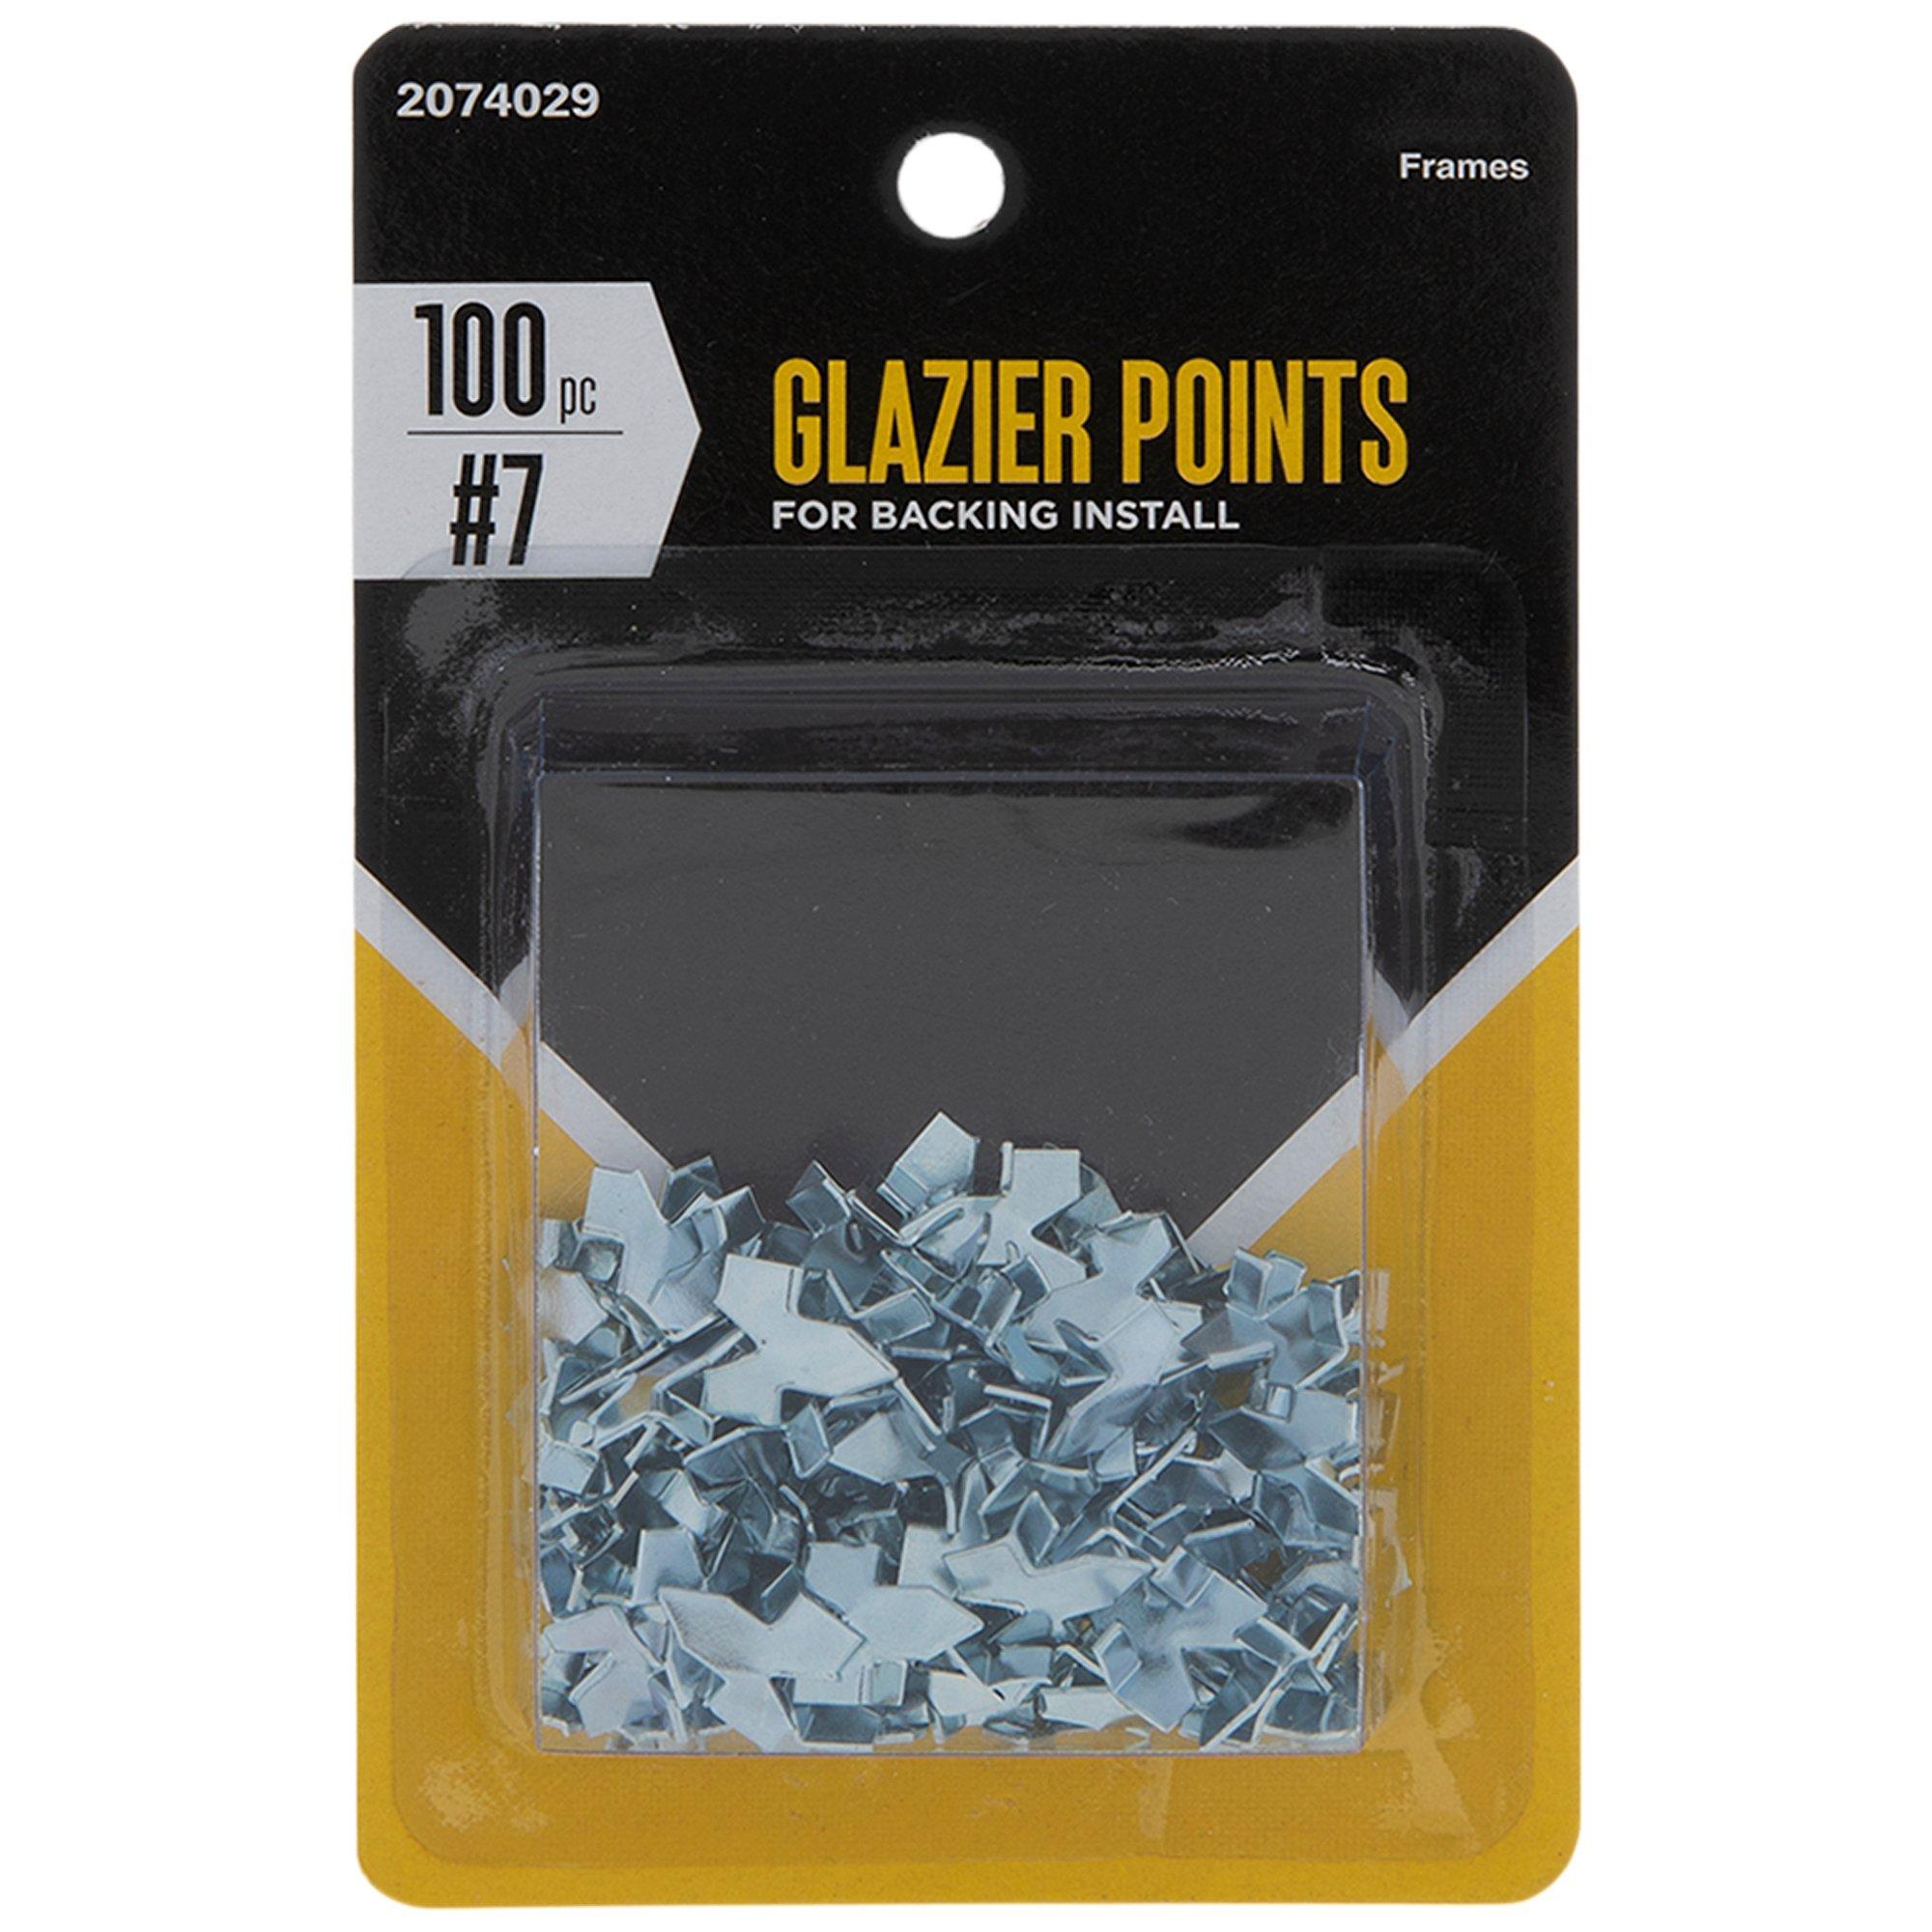 Fletcher PUSH POINTS Tabs for Picture Frame Framing Window Glazing